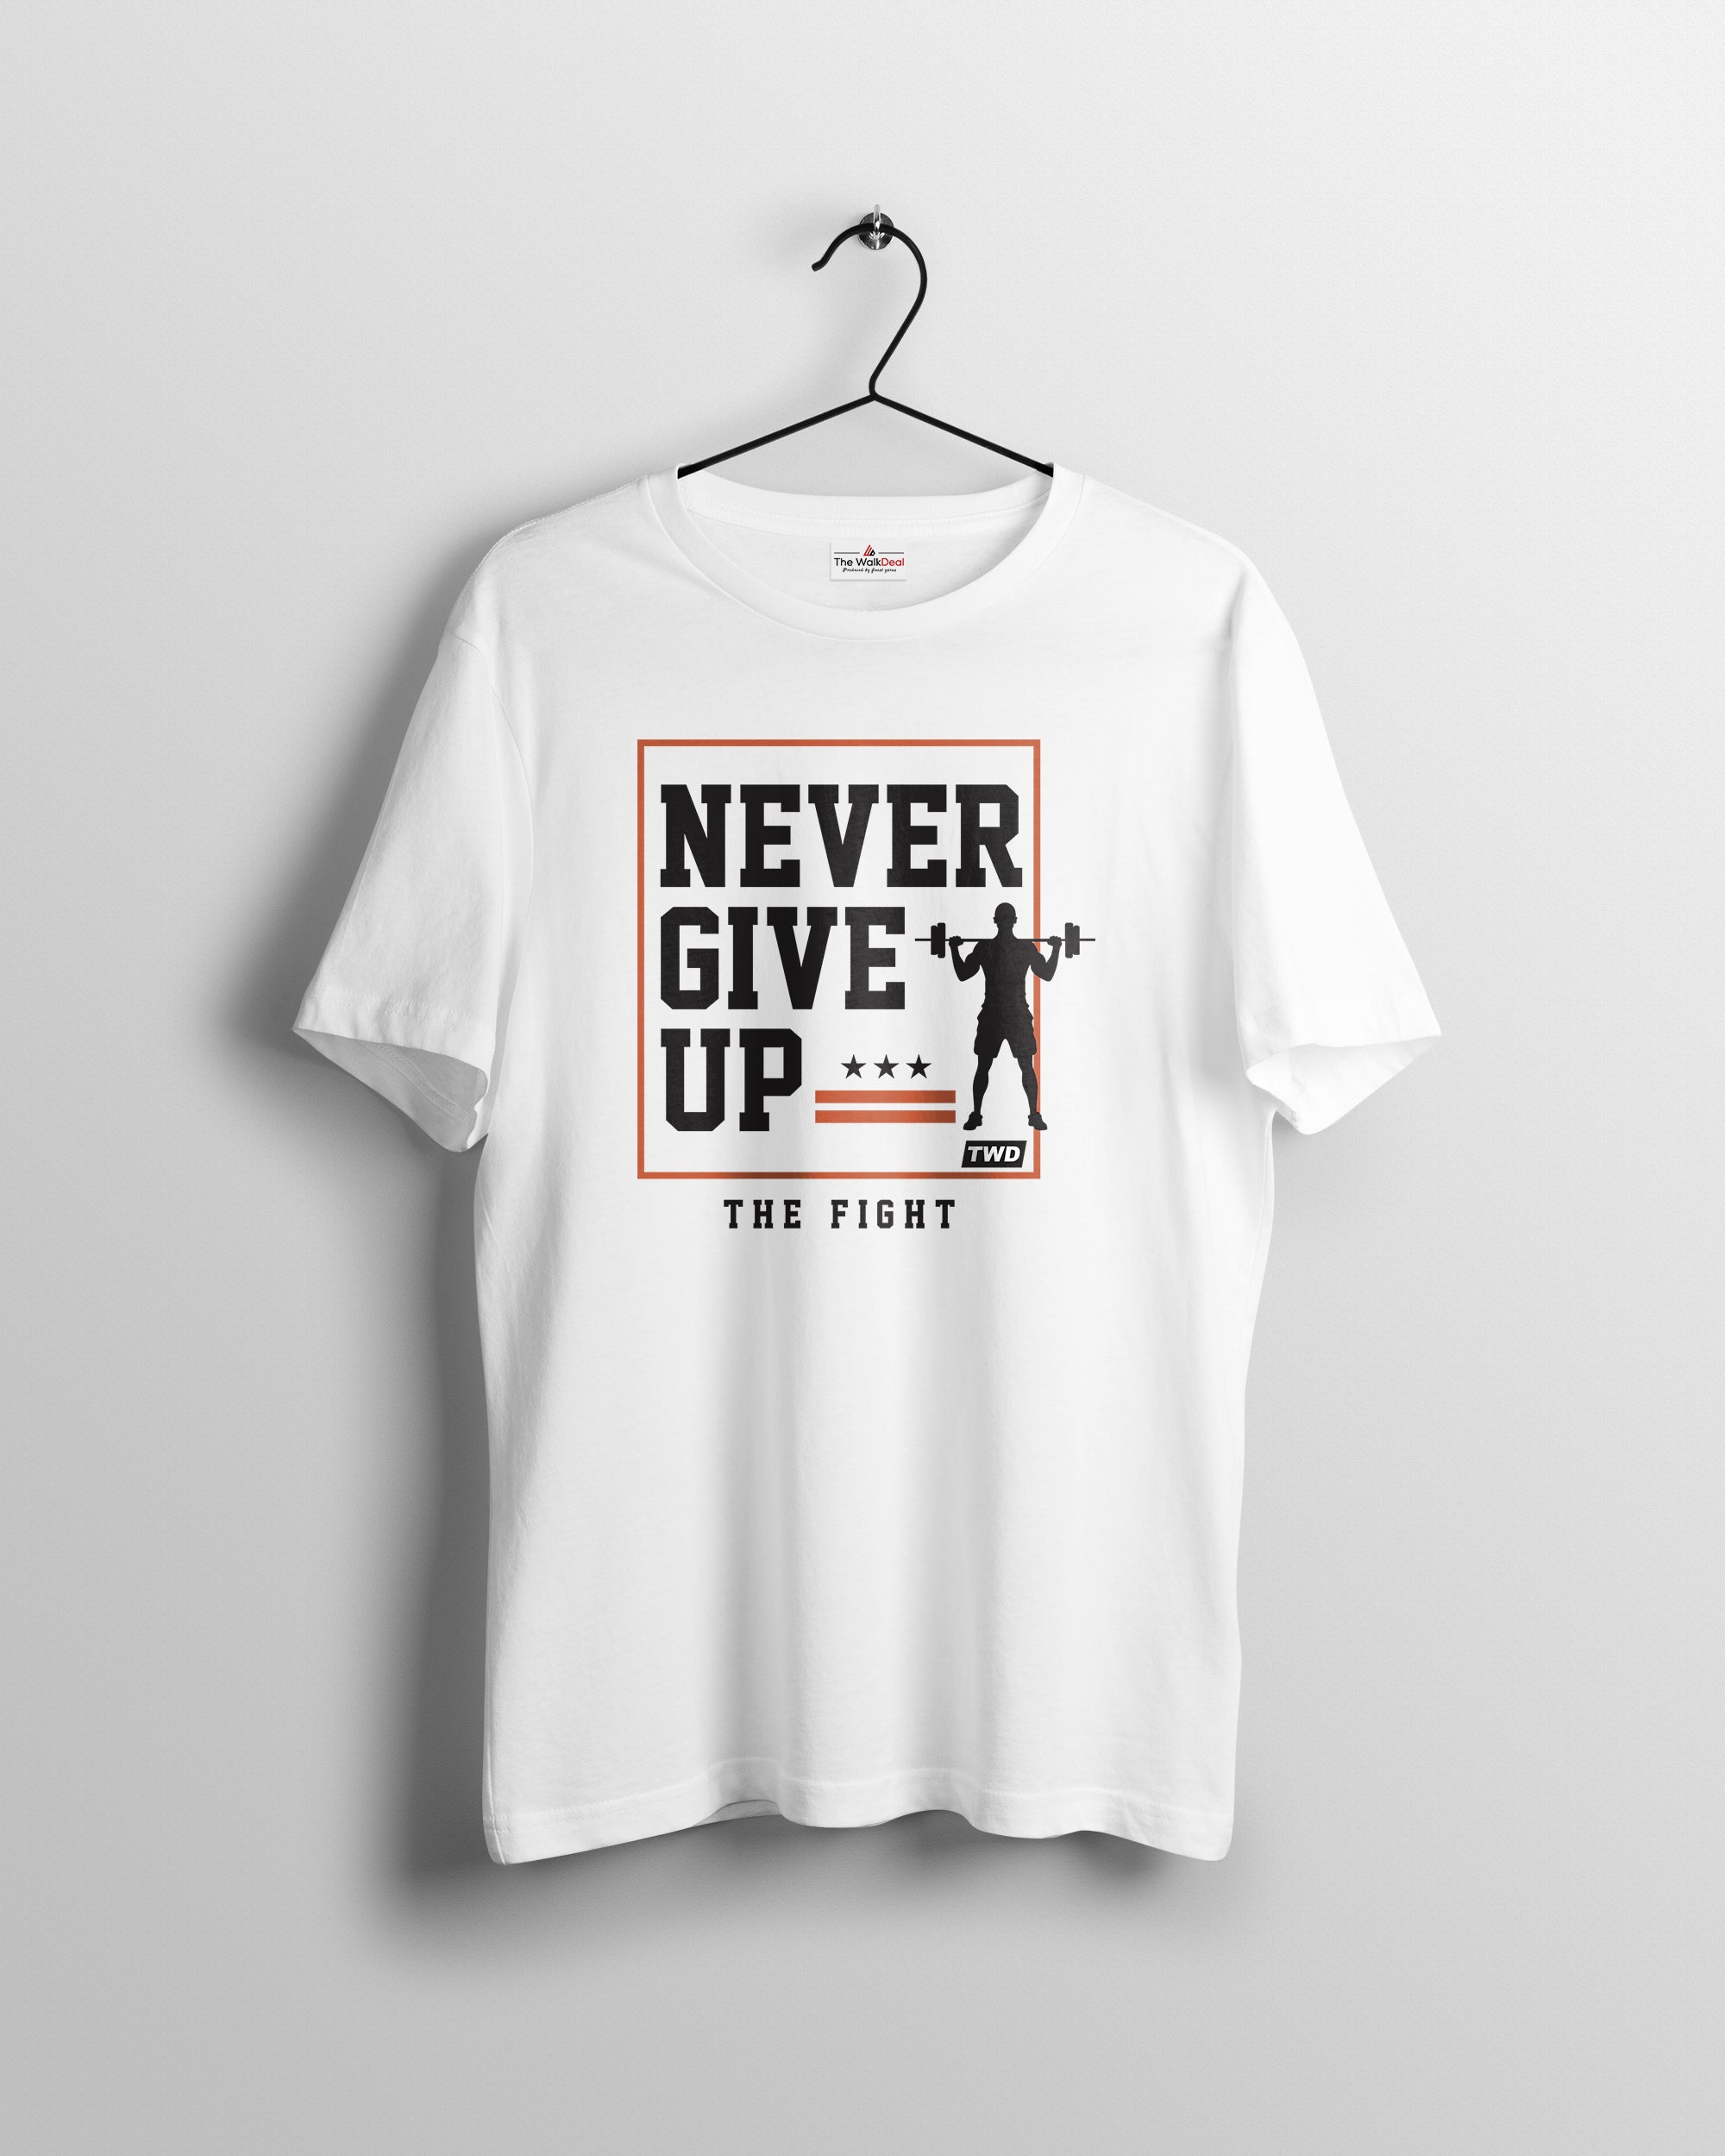 The Fight T-Shirts For Men || White || Stylish Tshirts || 100% Cotton || Best T-Shirt For Men's